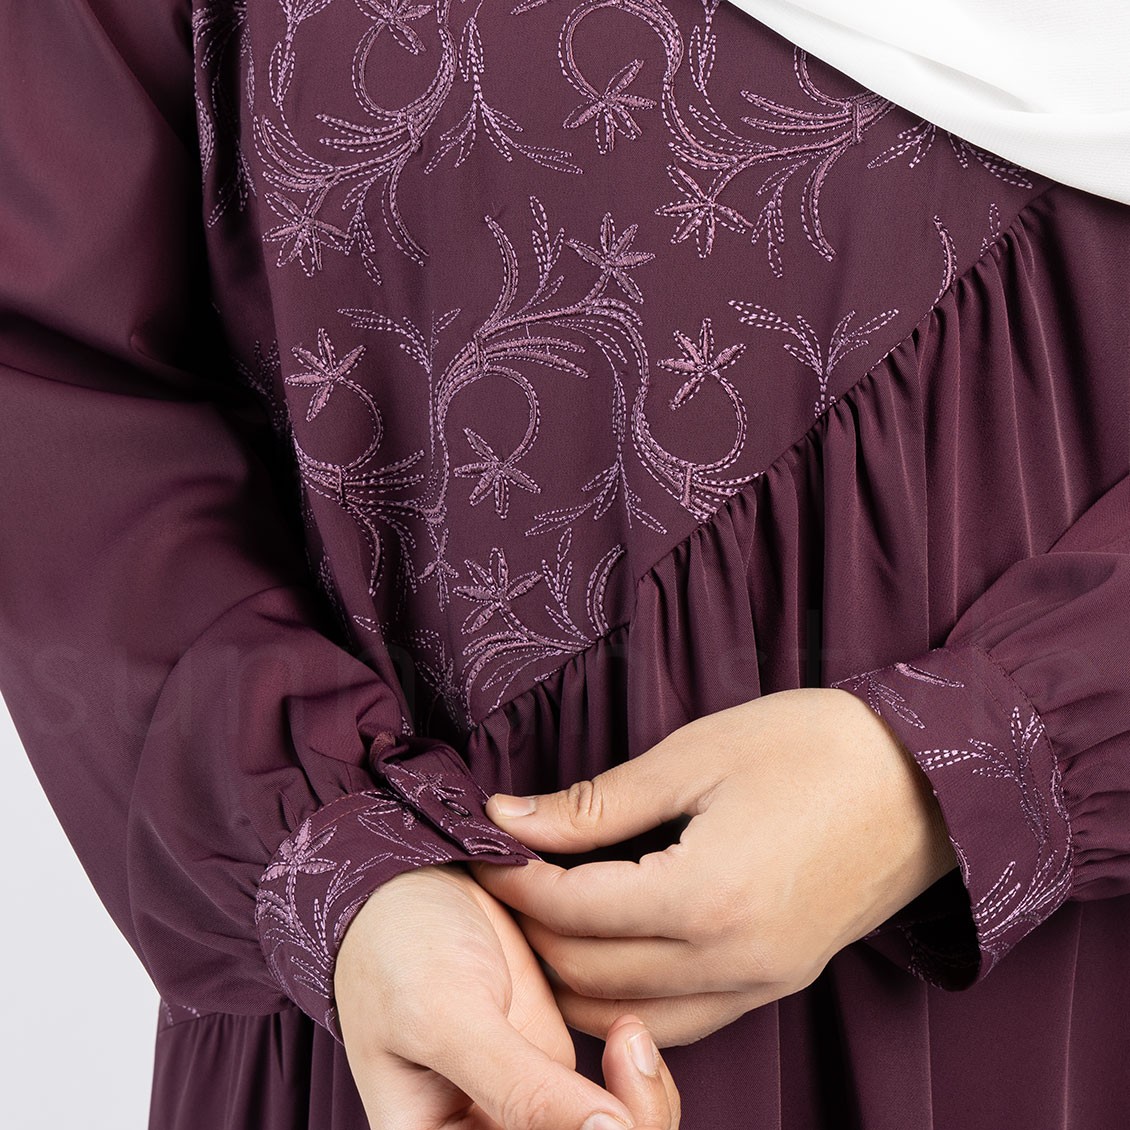 Sunnah Style Floral Umbrella Abaya Mulberry Embroidered